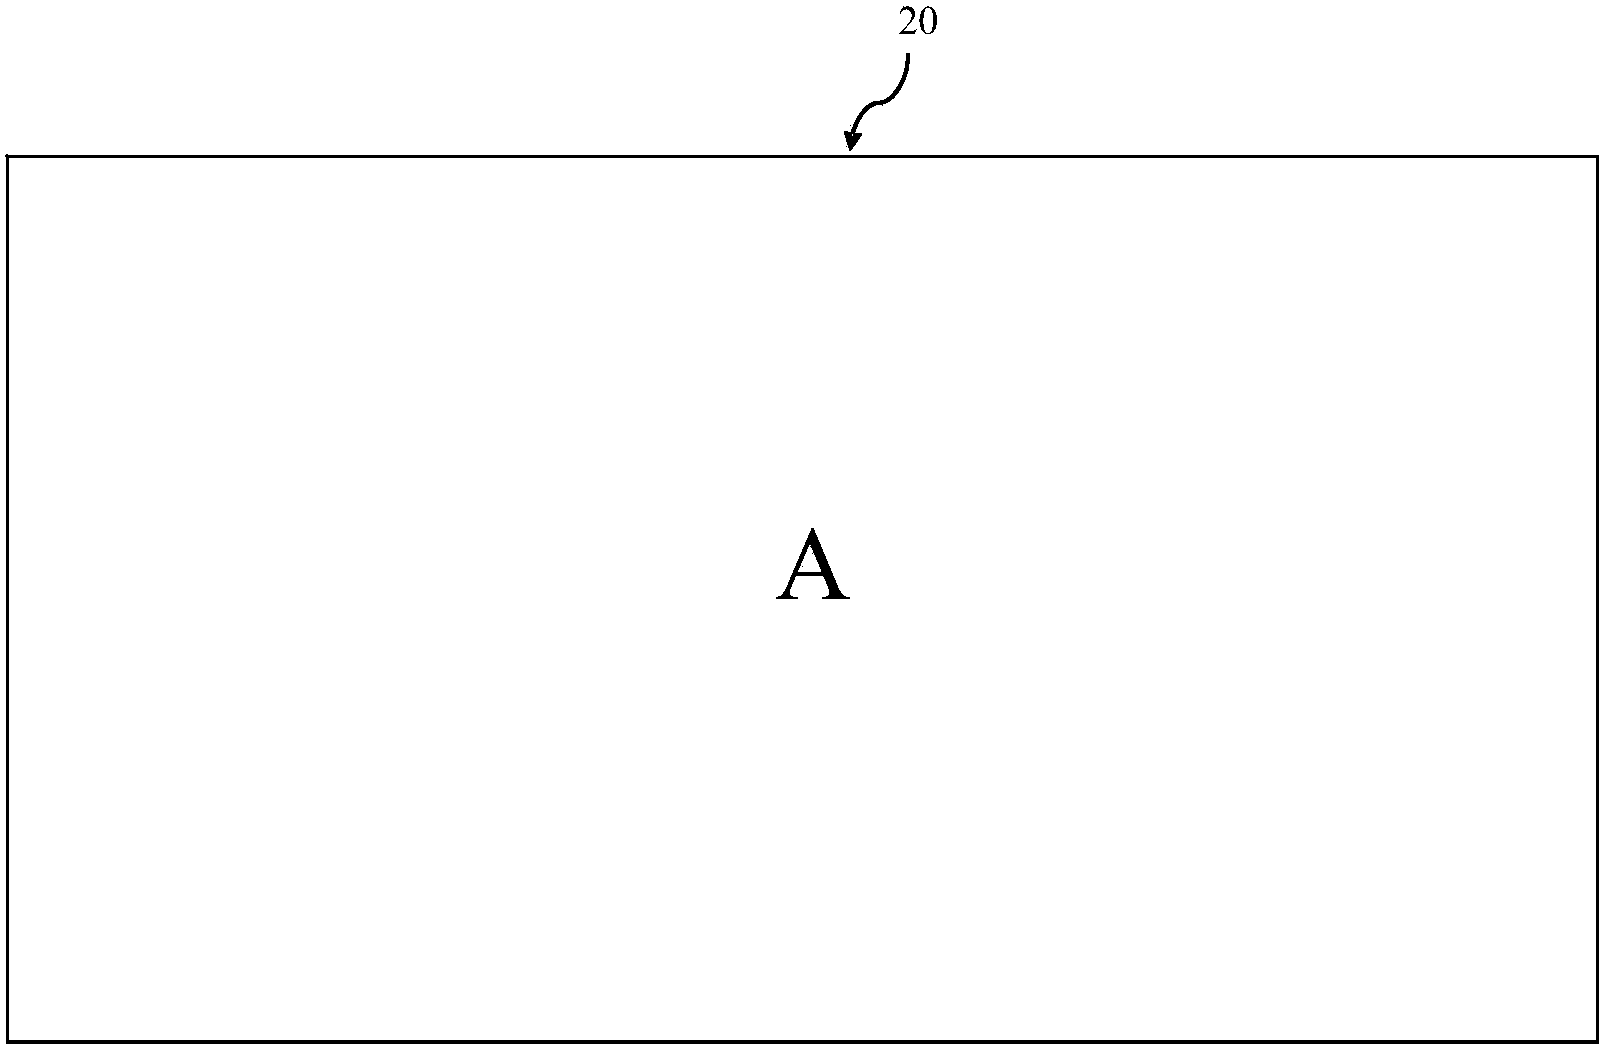 Display control method and system